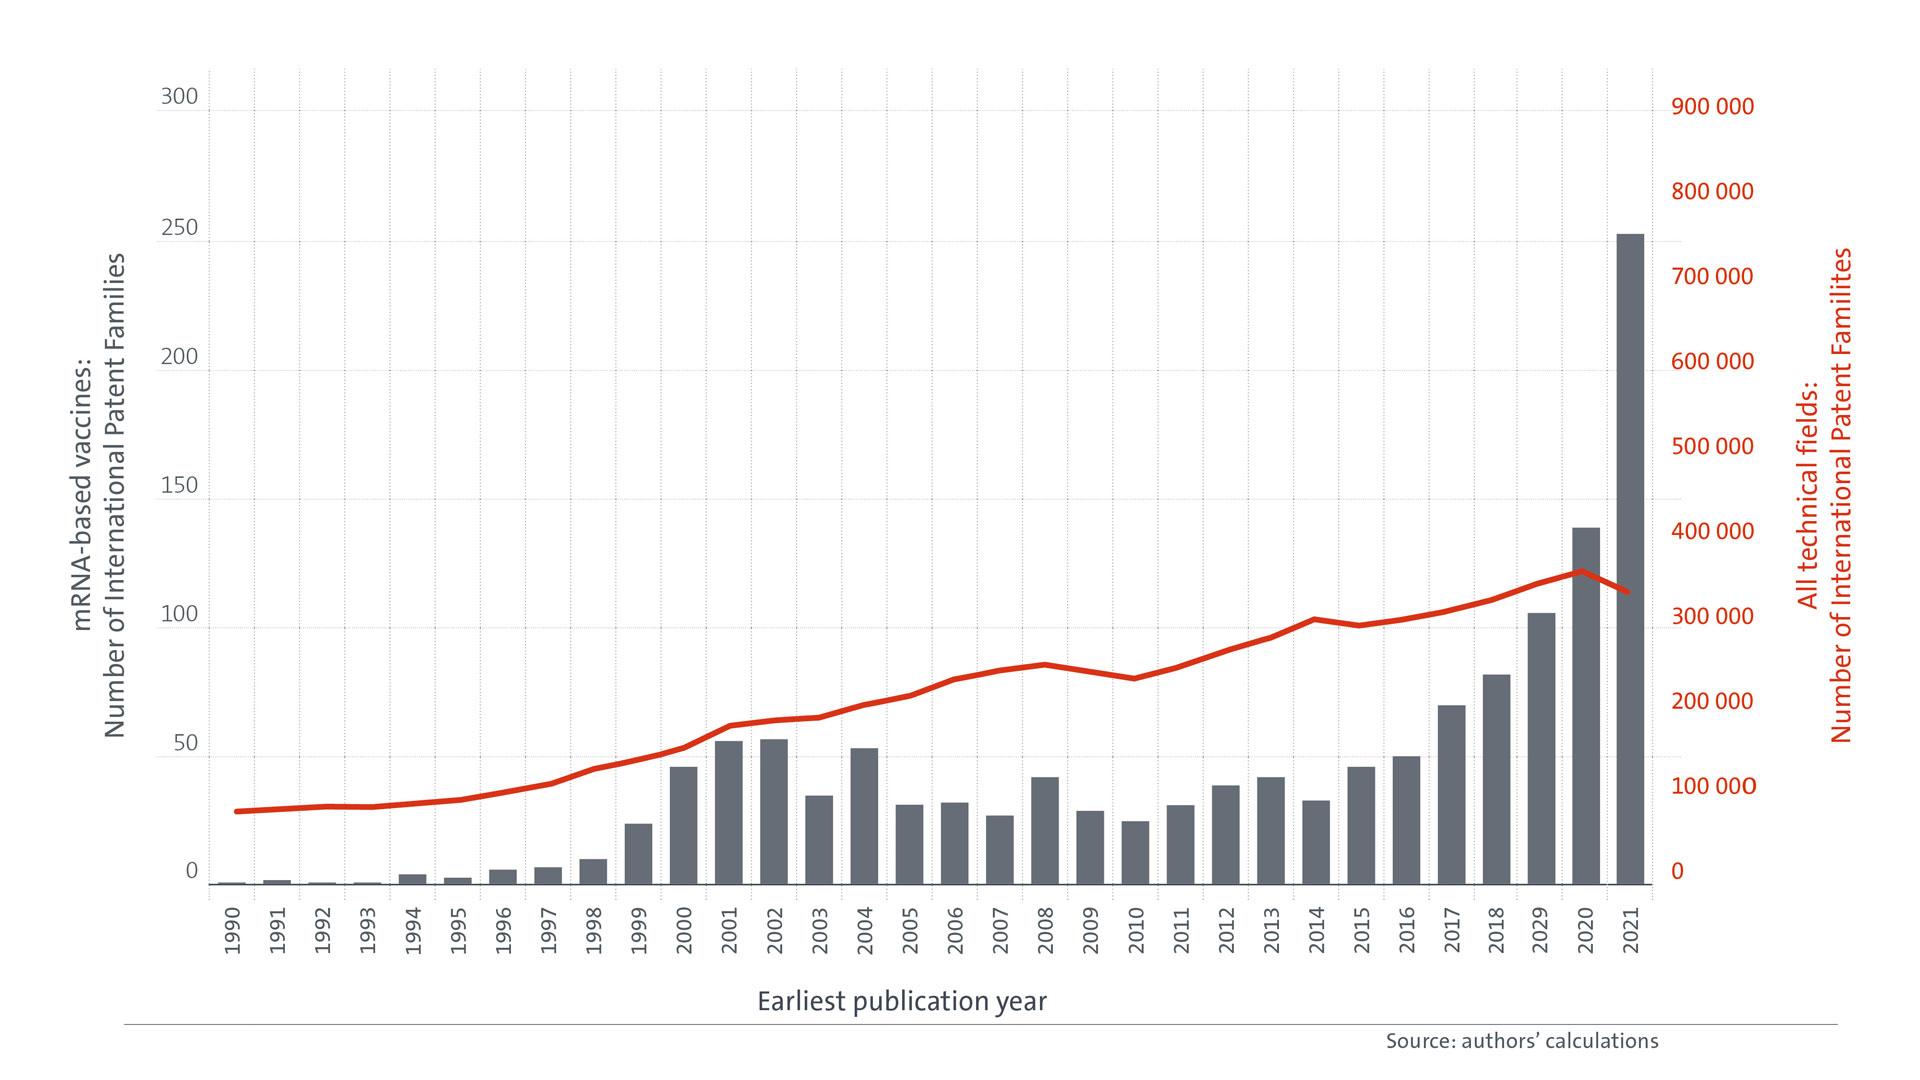 Graphic showing the "mRNA-based vaccines: Number of International Patent Families" from 1990 until 2021"